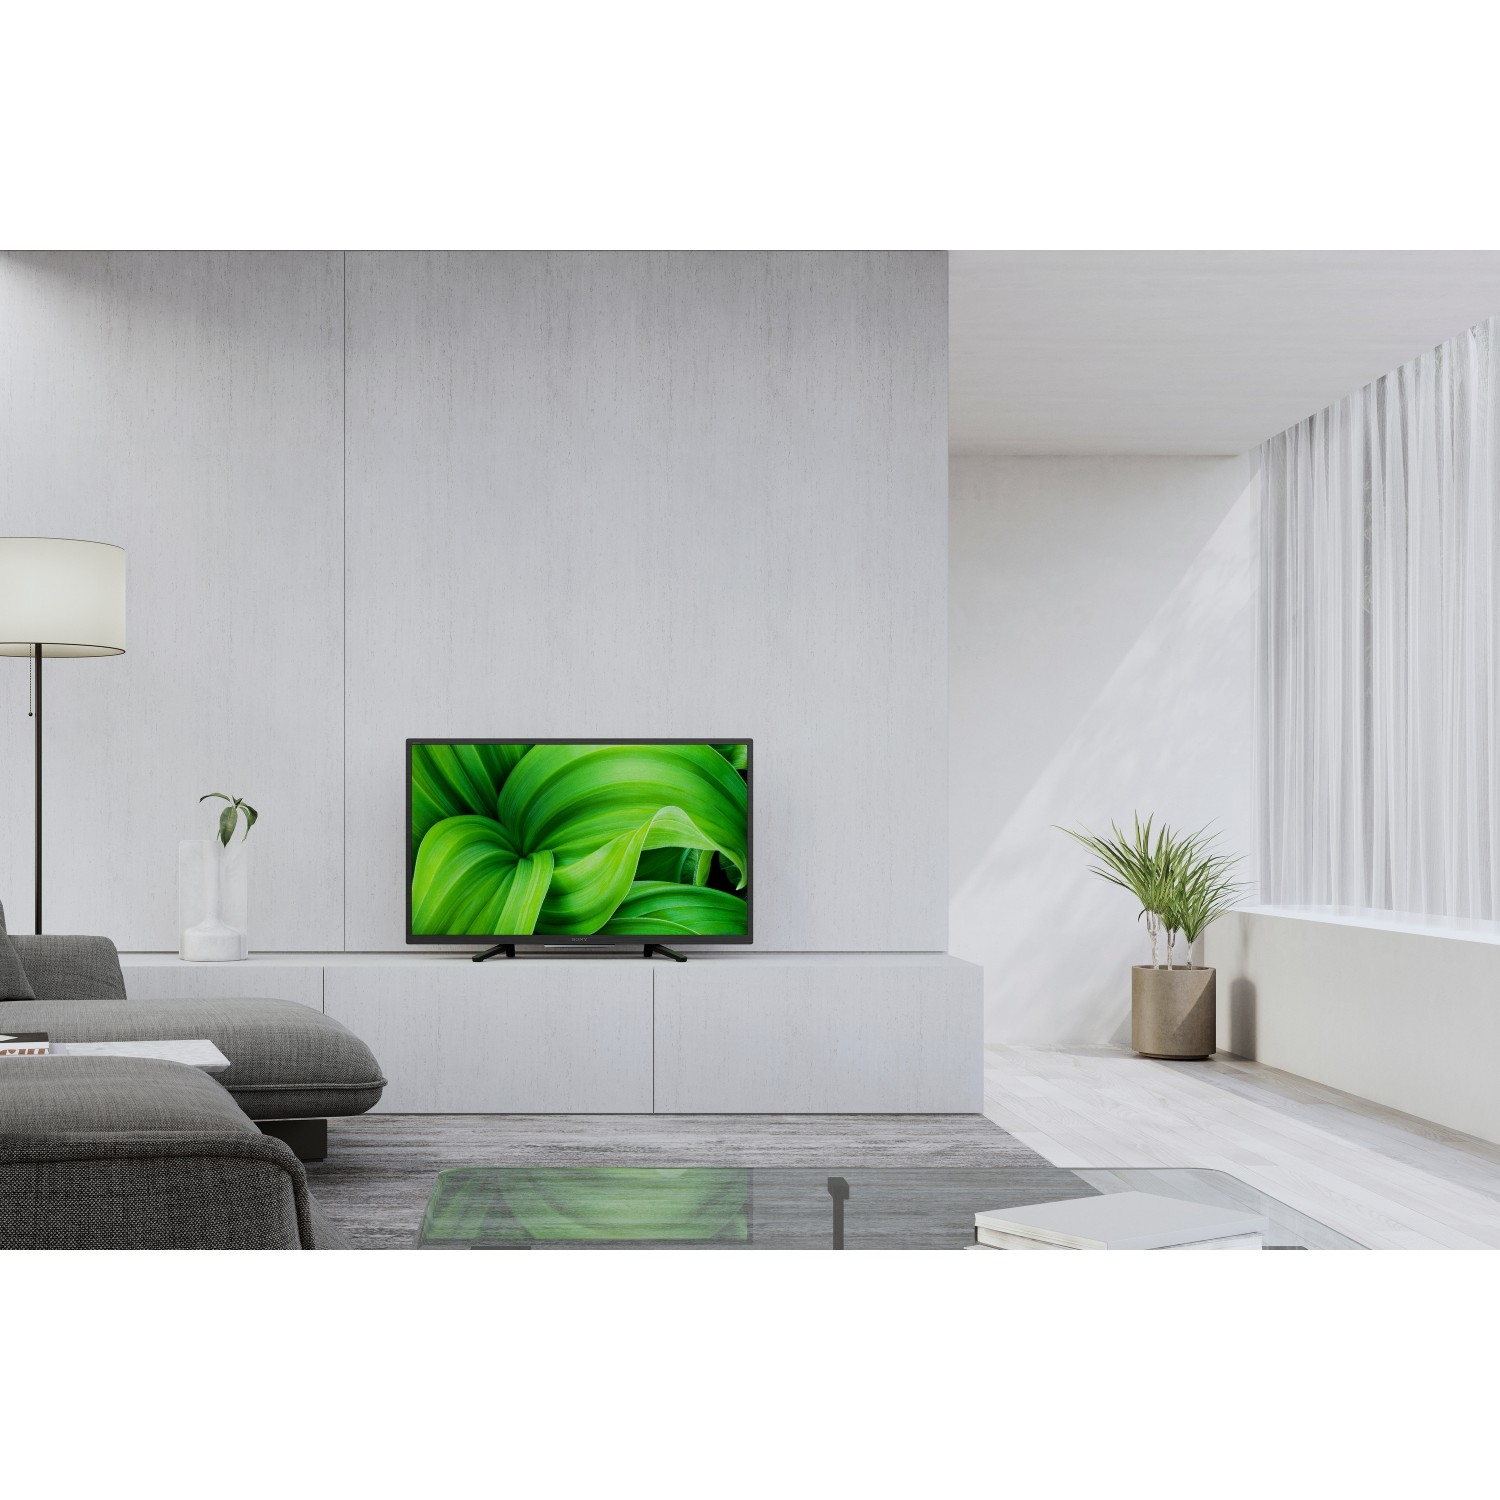 Sony KD32W800PU 32" HD Ready HDR Android TV with Voice Search - 4